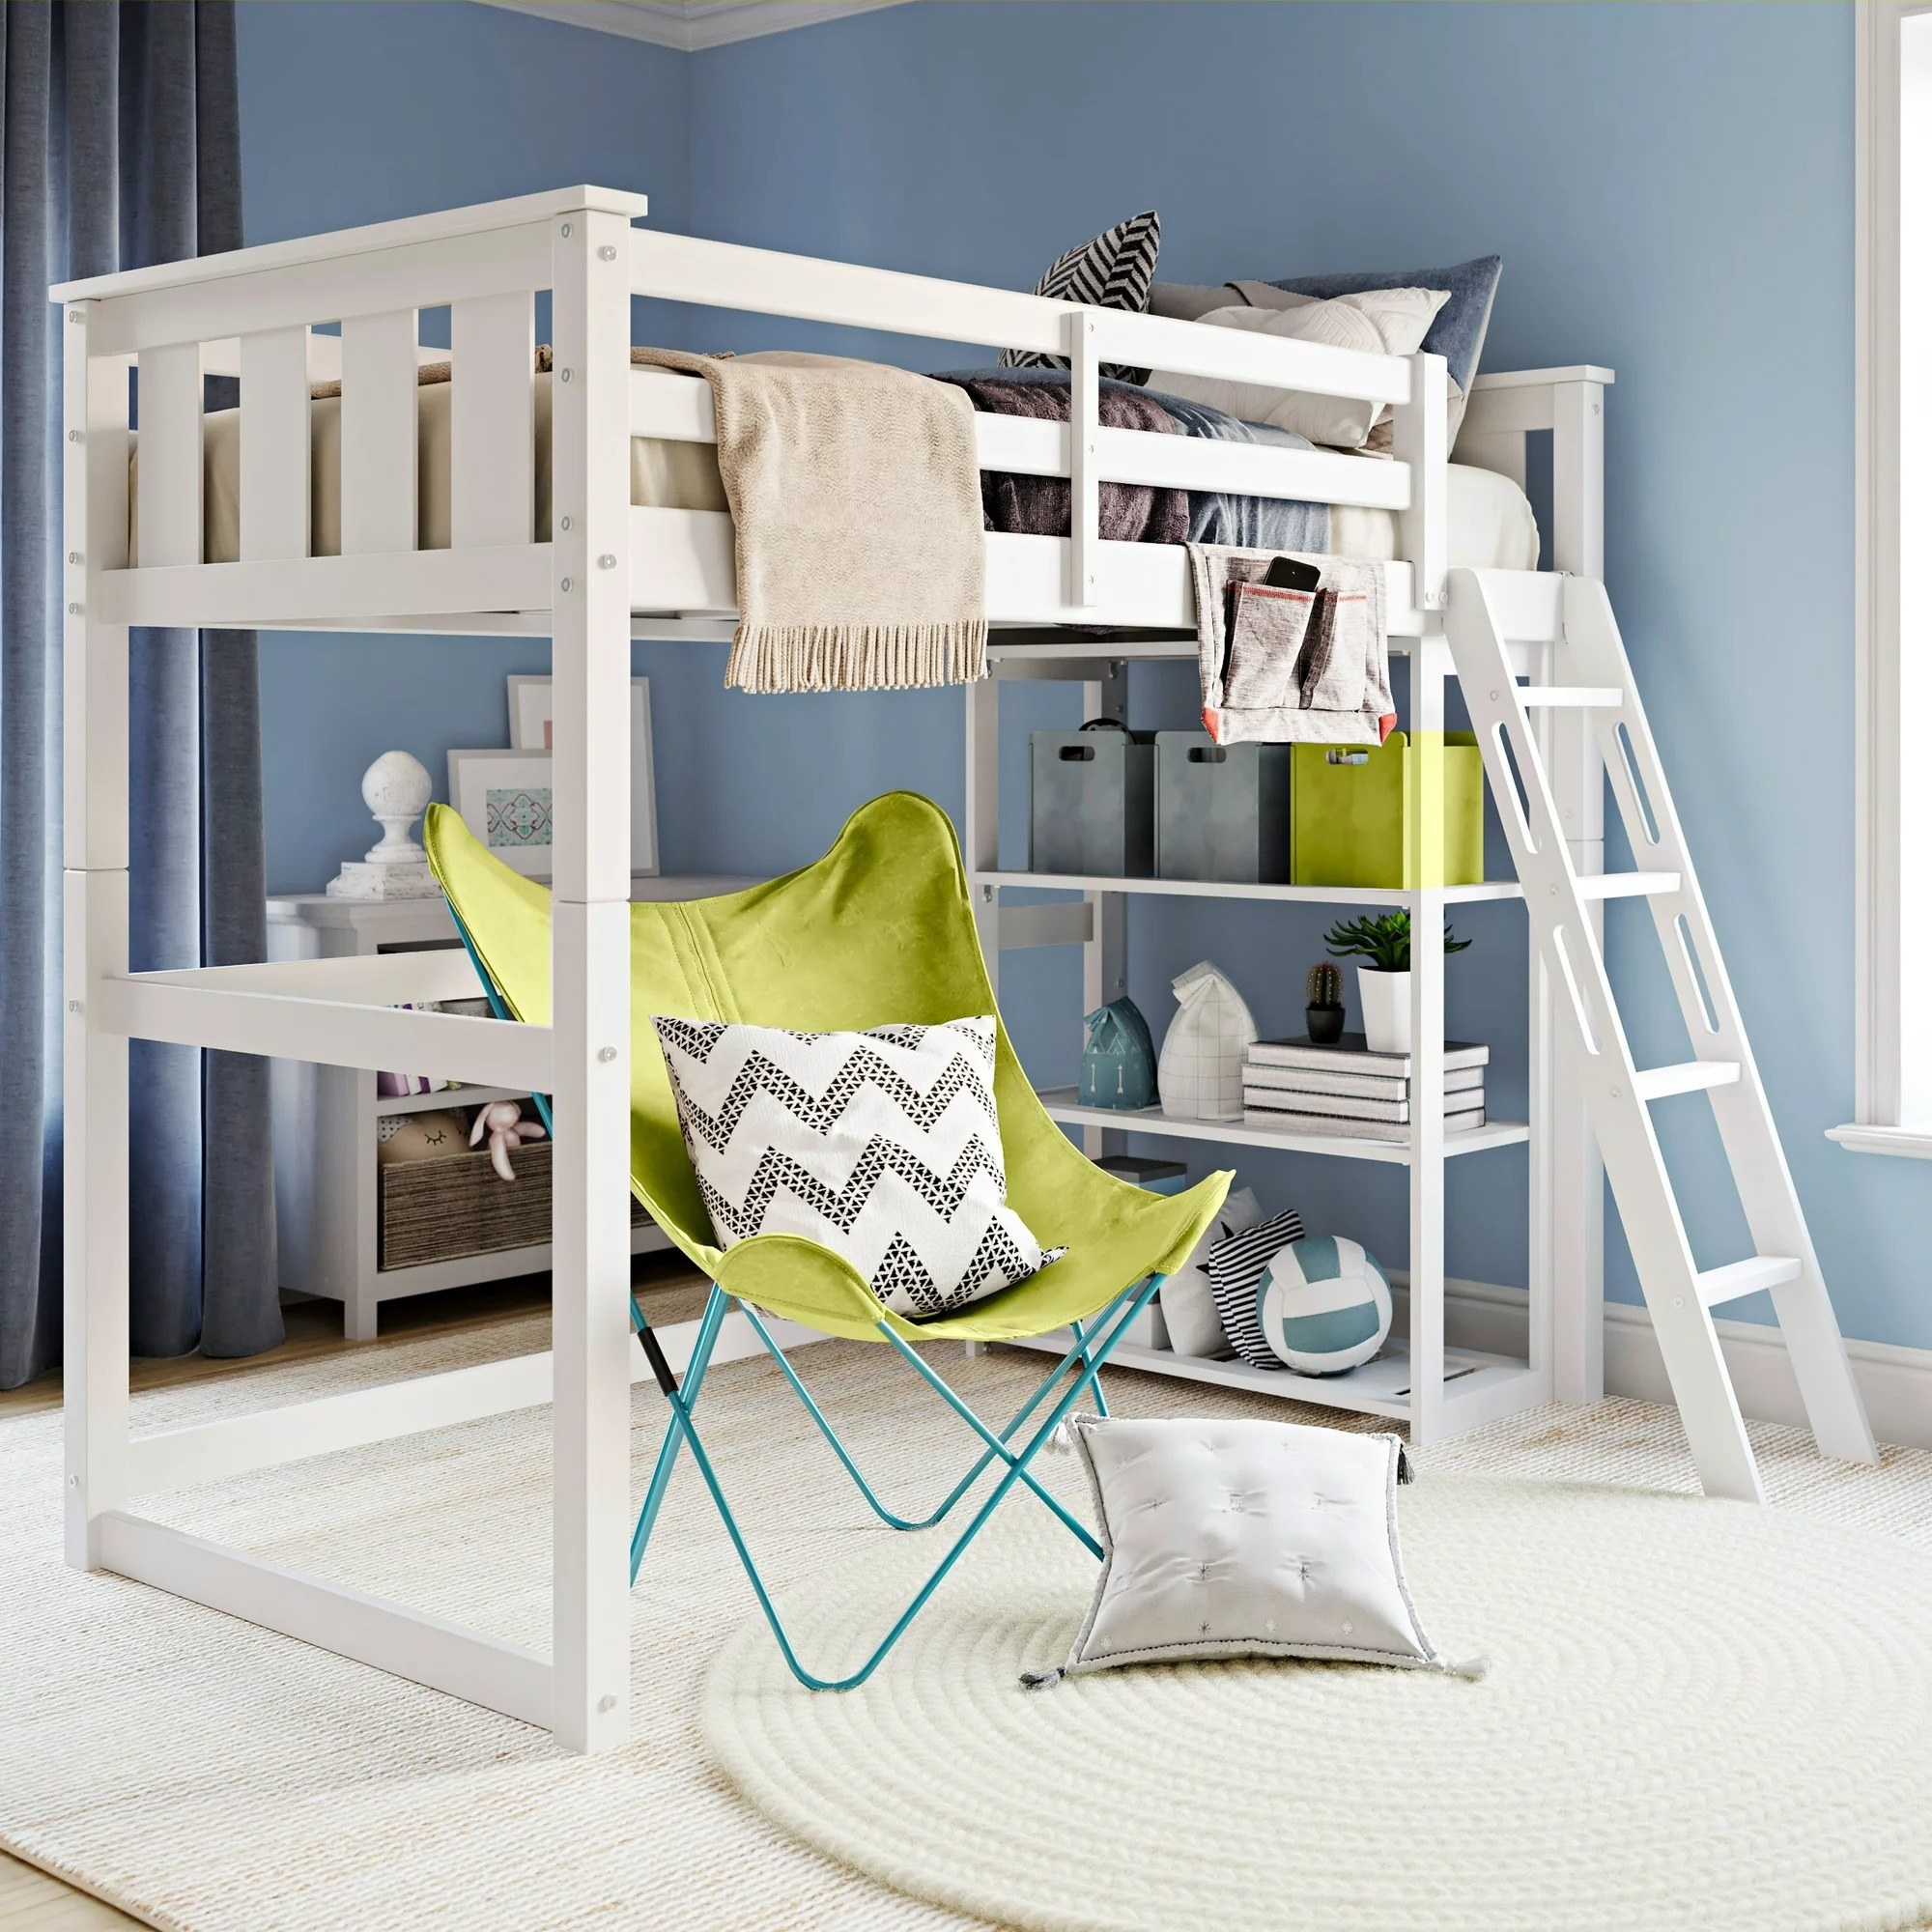 Loft bed with shelving